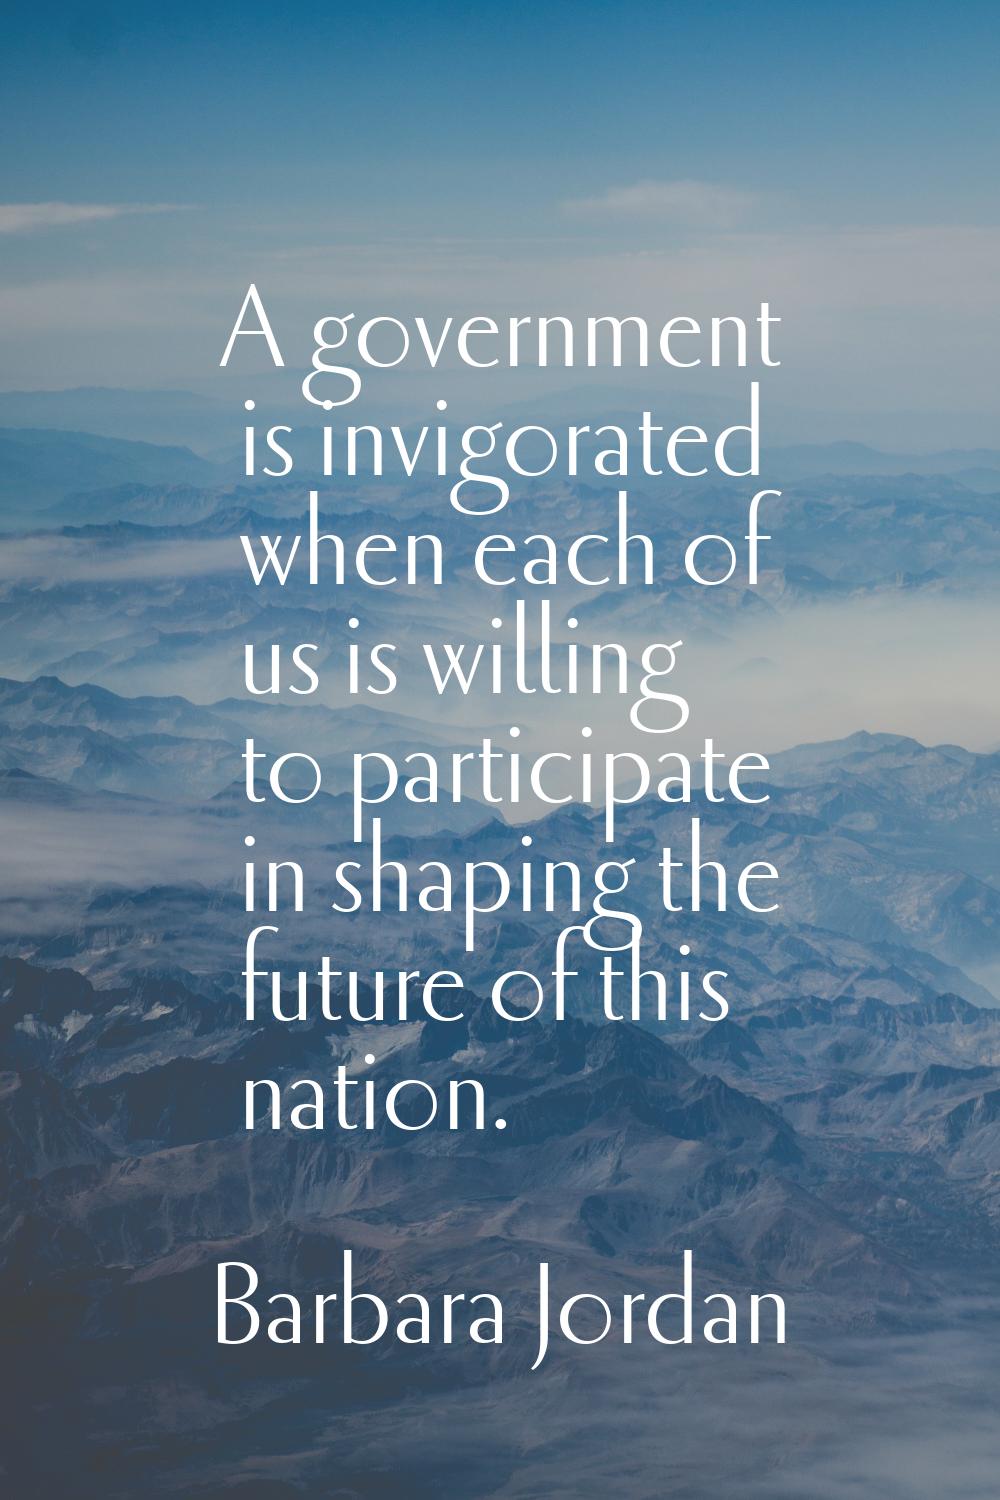 A government is invigorated when each of us is willing to participate in shaping the future of this